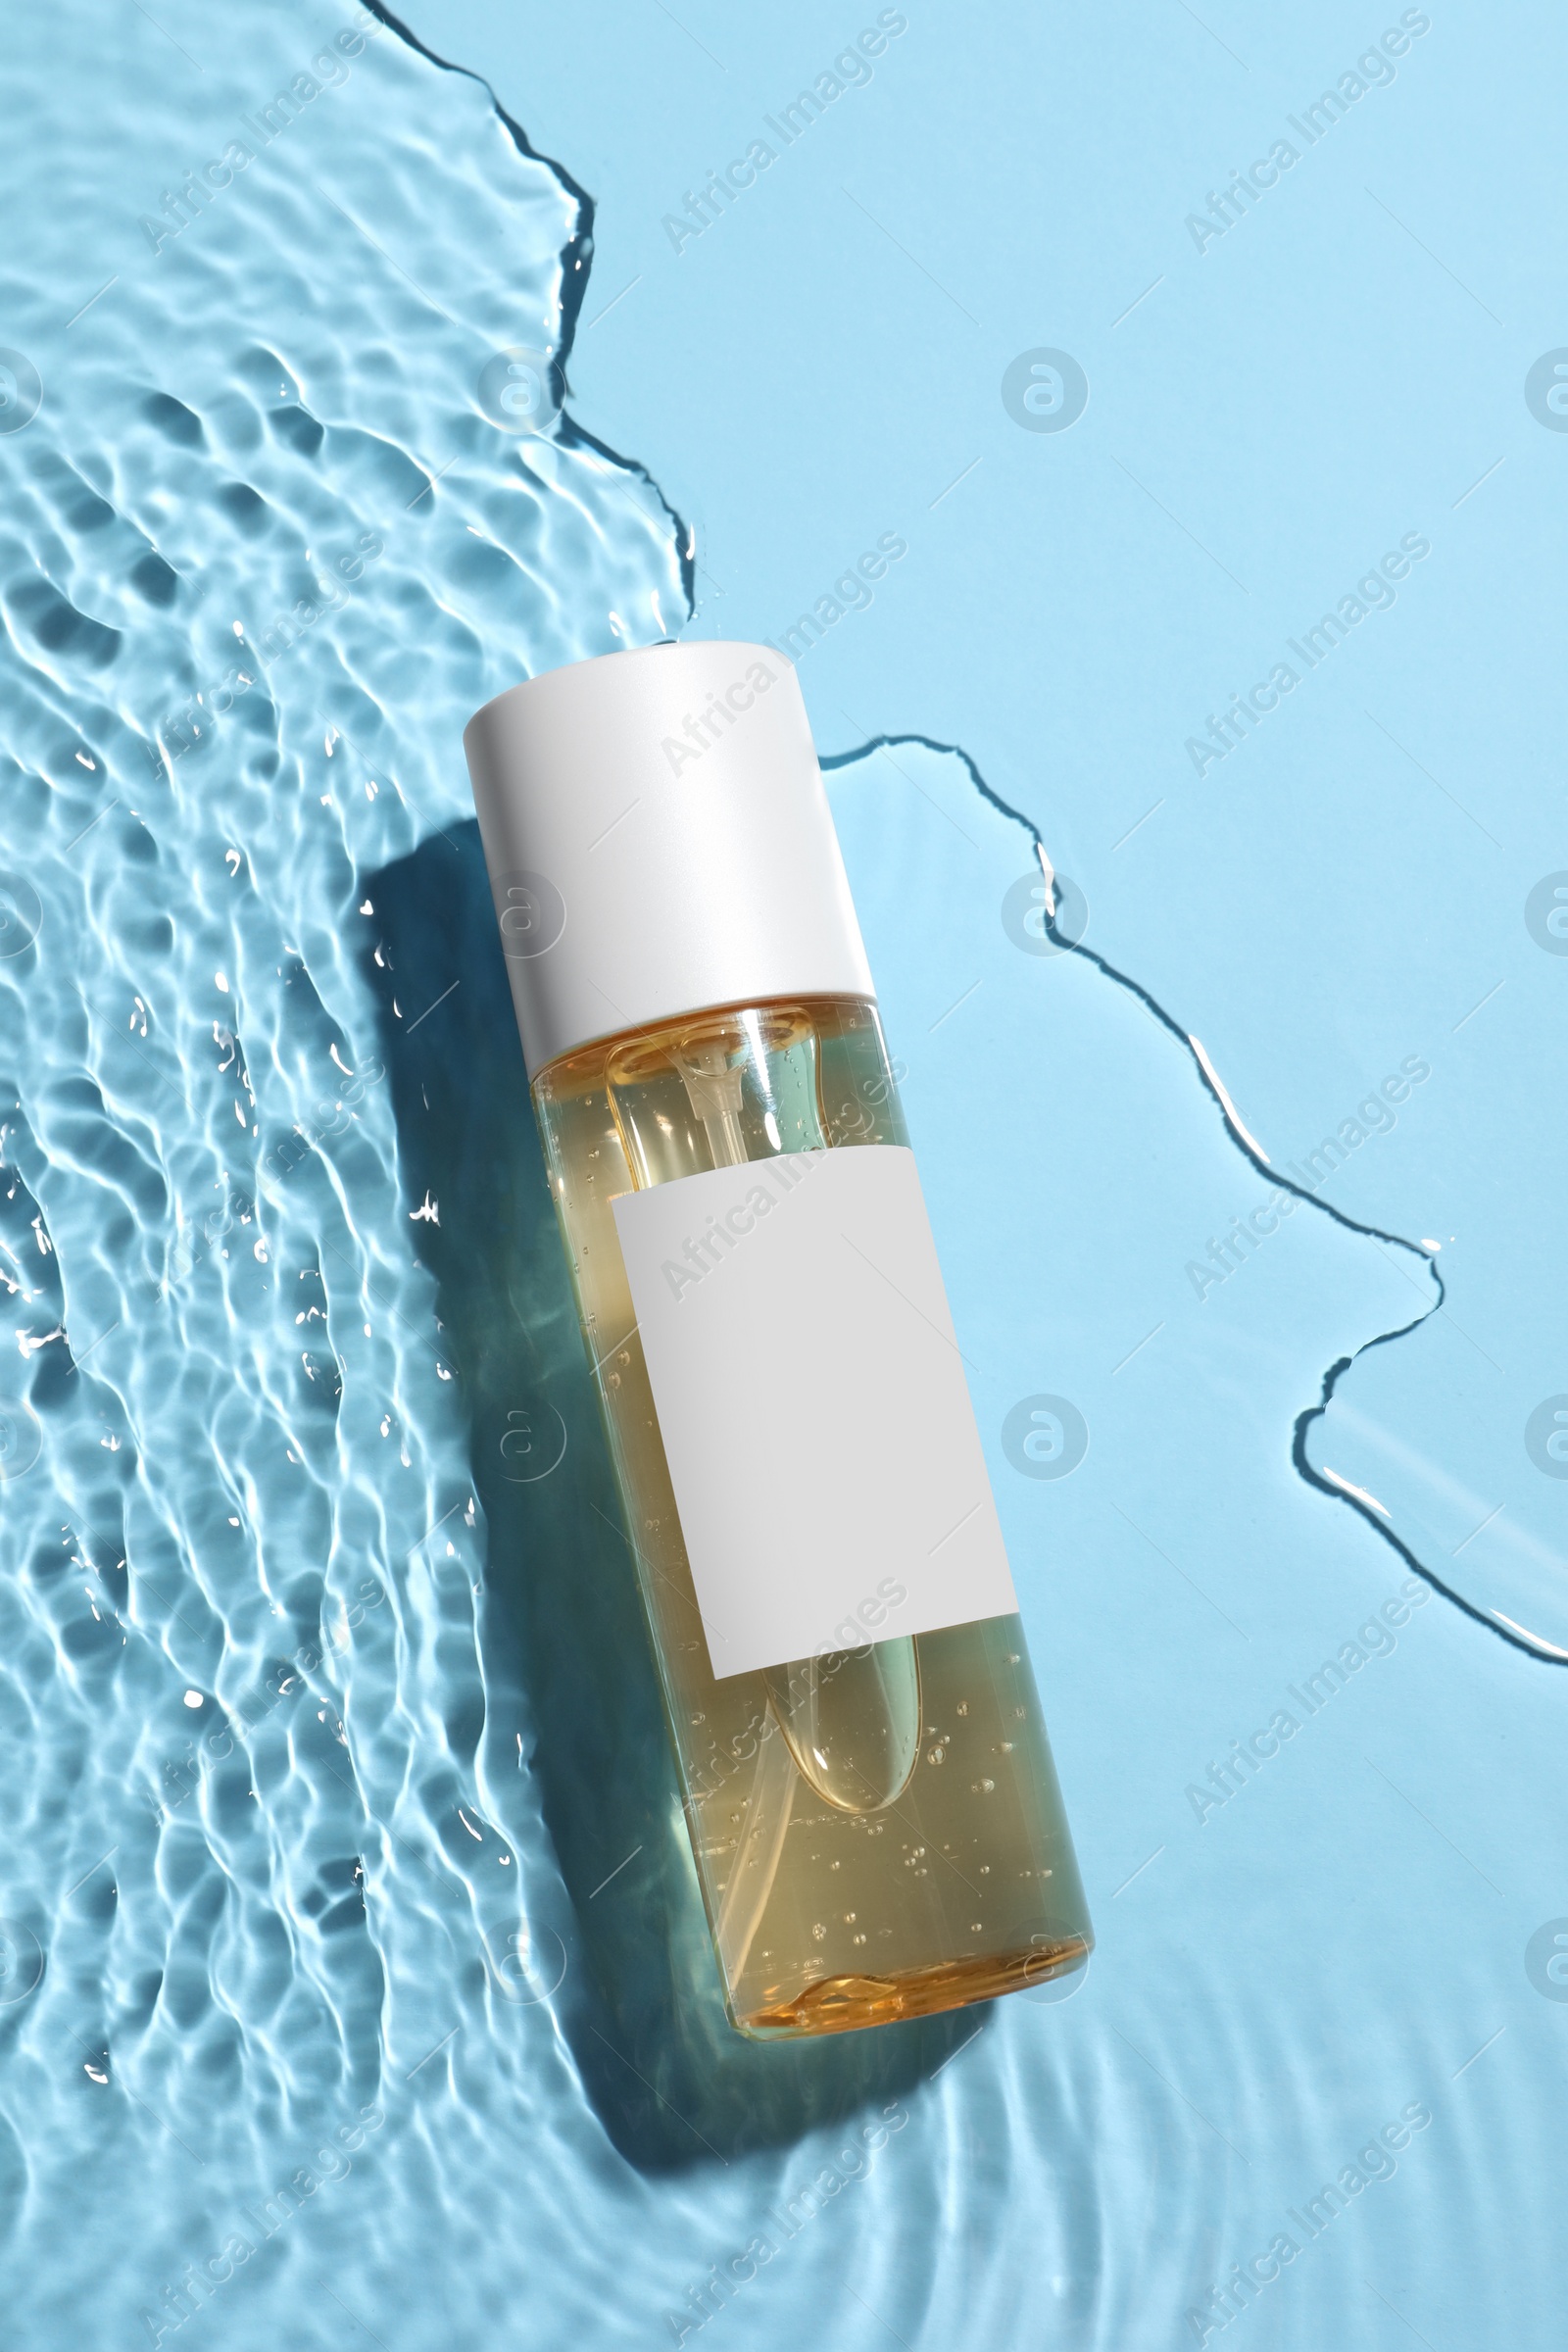 Photo of Bottle of cosmetic oil in water on light blue background, top view